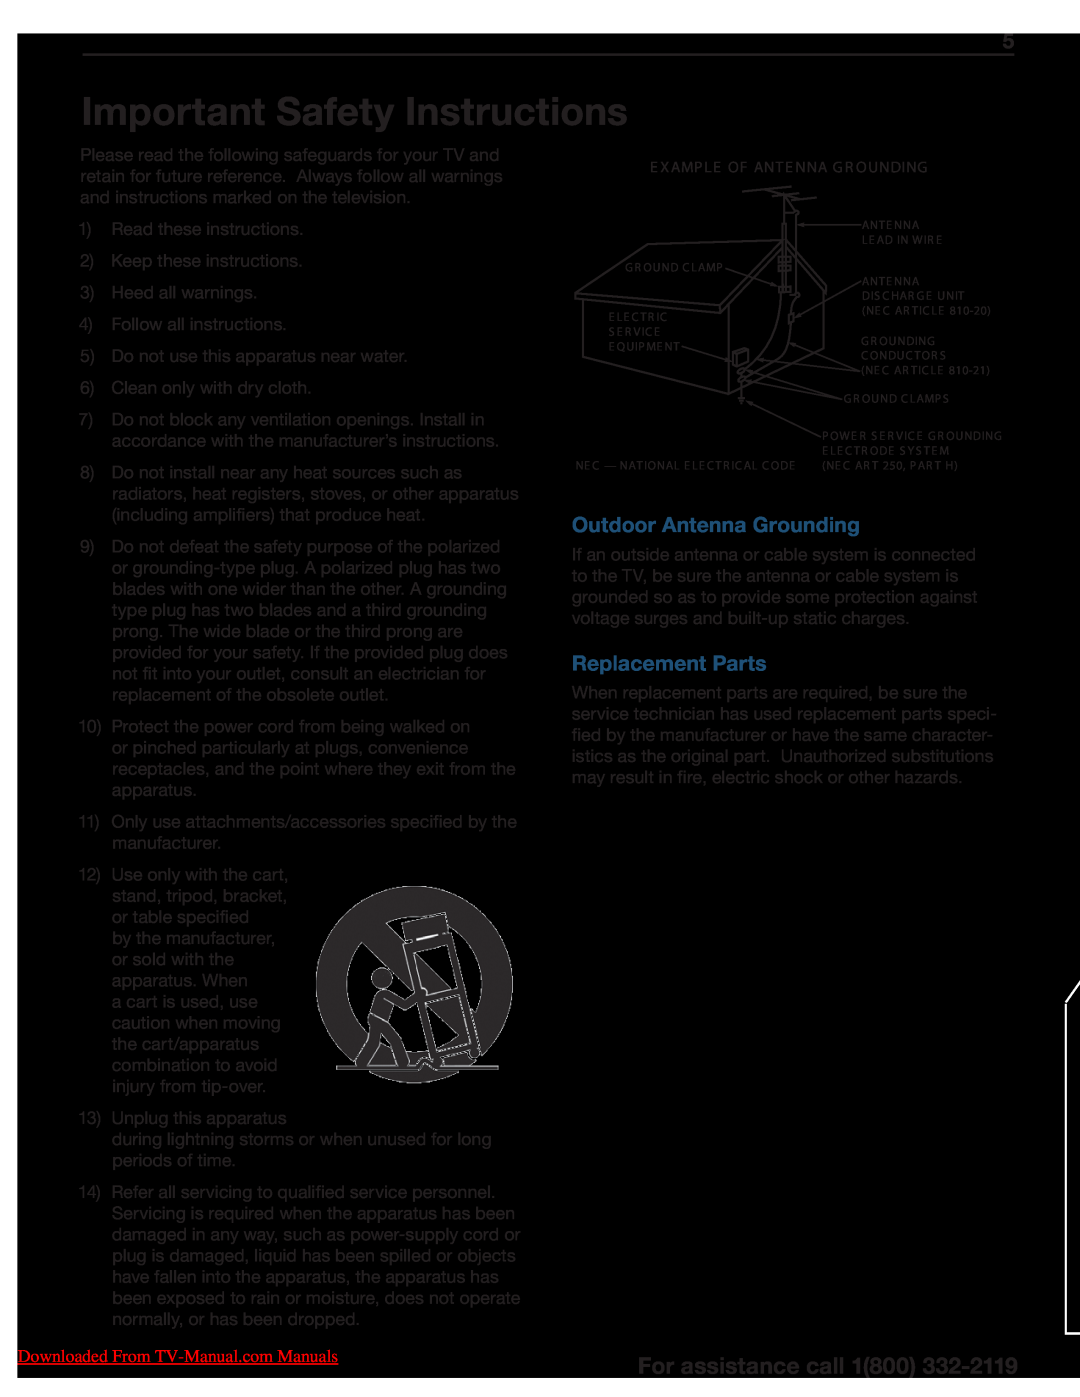 Mitsumi electronic 738 Series manual Important Safety Instructions, For assistance call 1800, Outdoor Antenna Grounding 